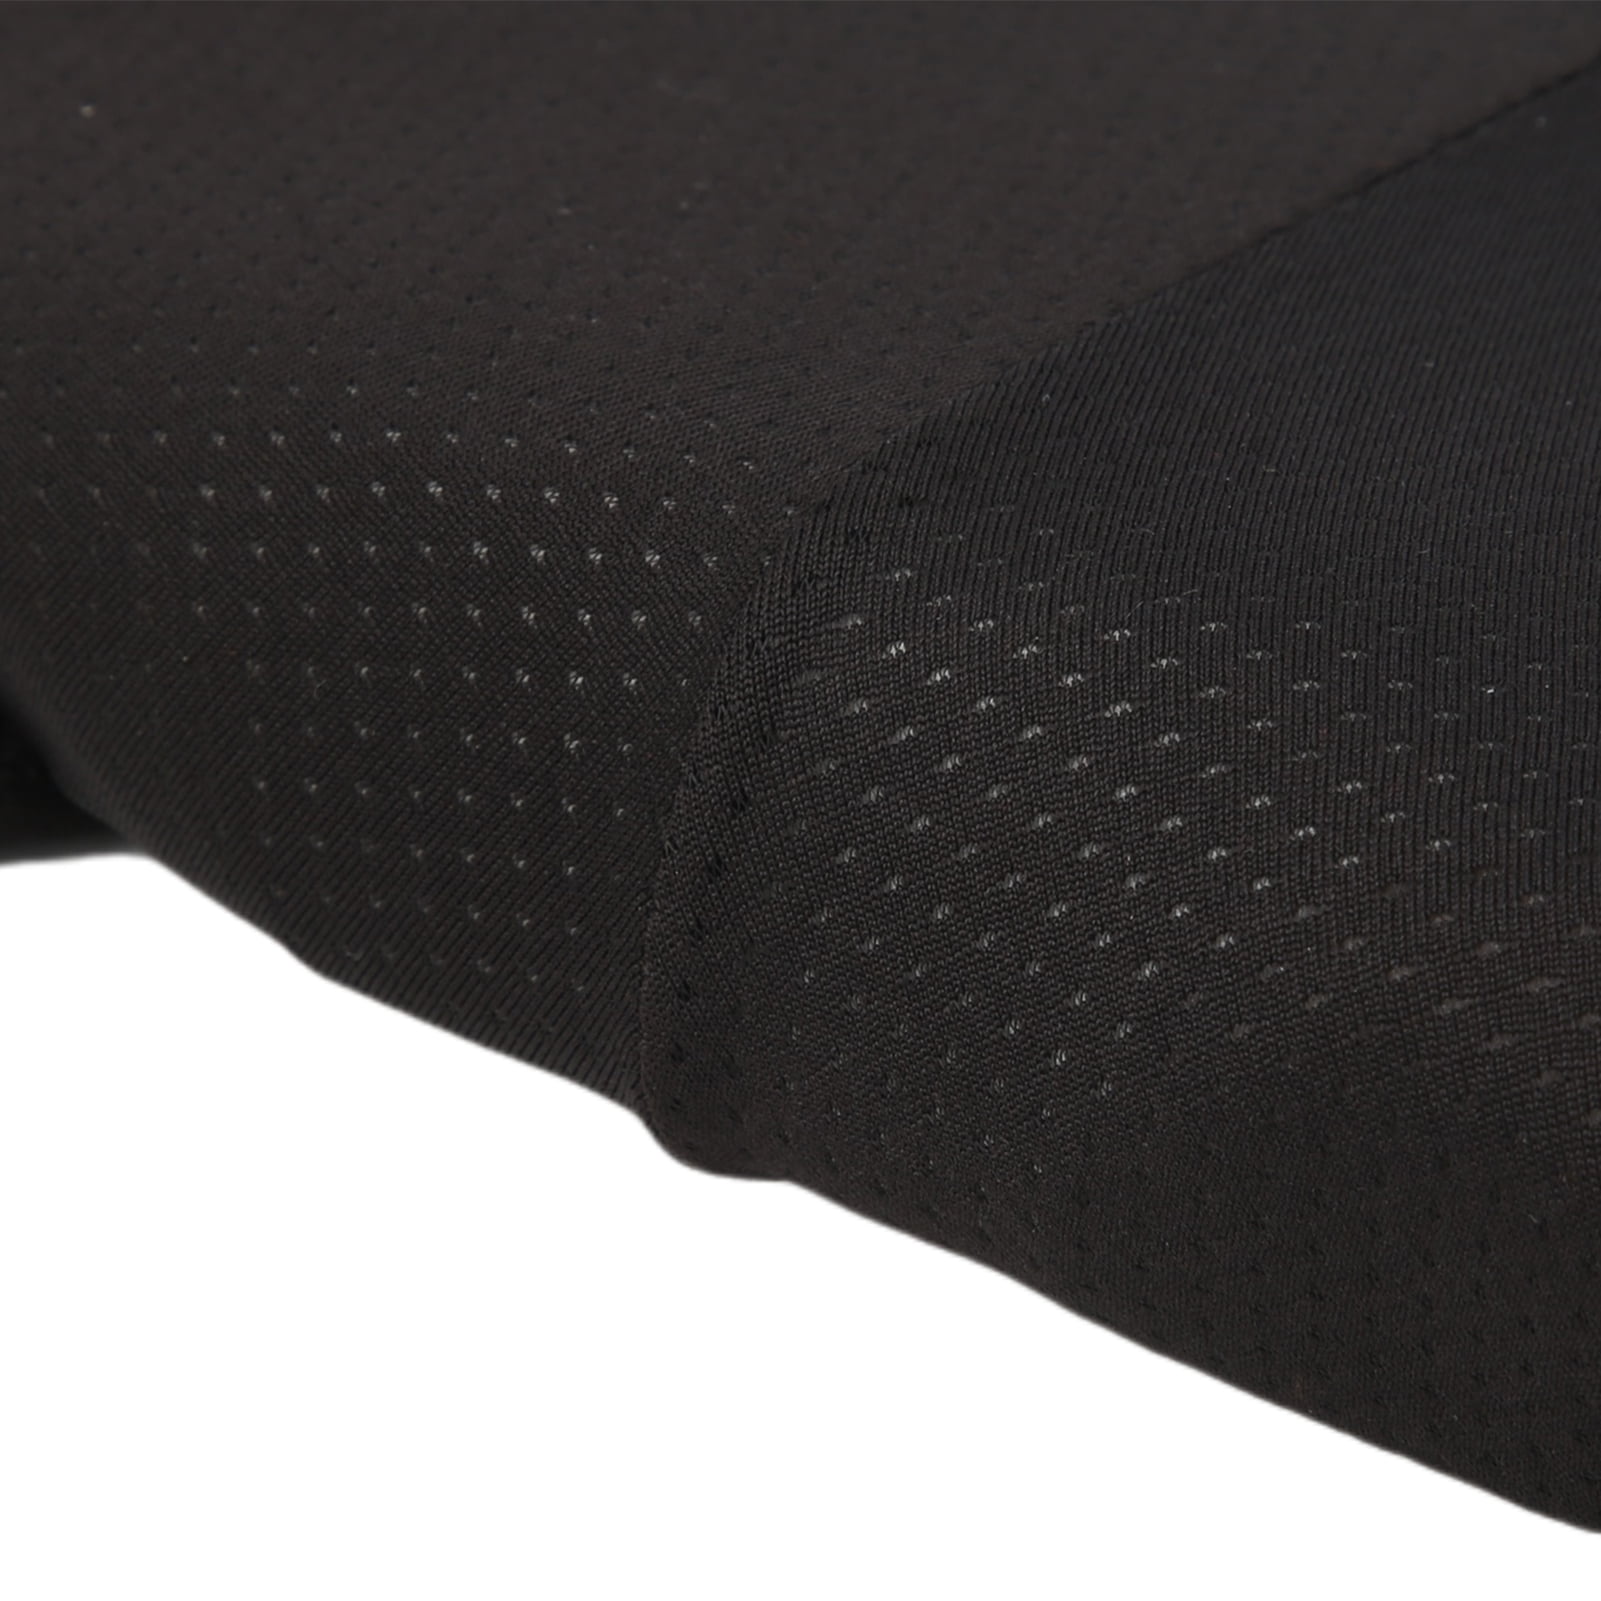 Details about   Riding Underwear Protective Breathable Padding Bike Underwear Cycling Shorts